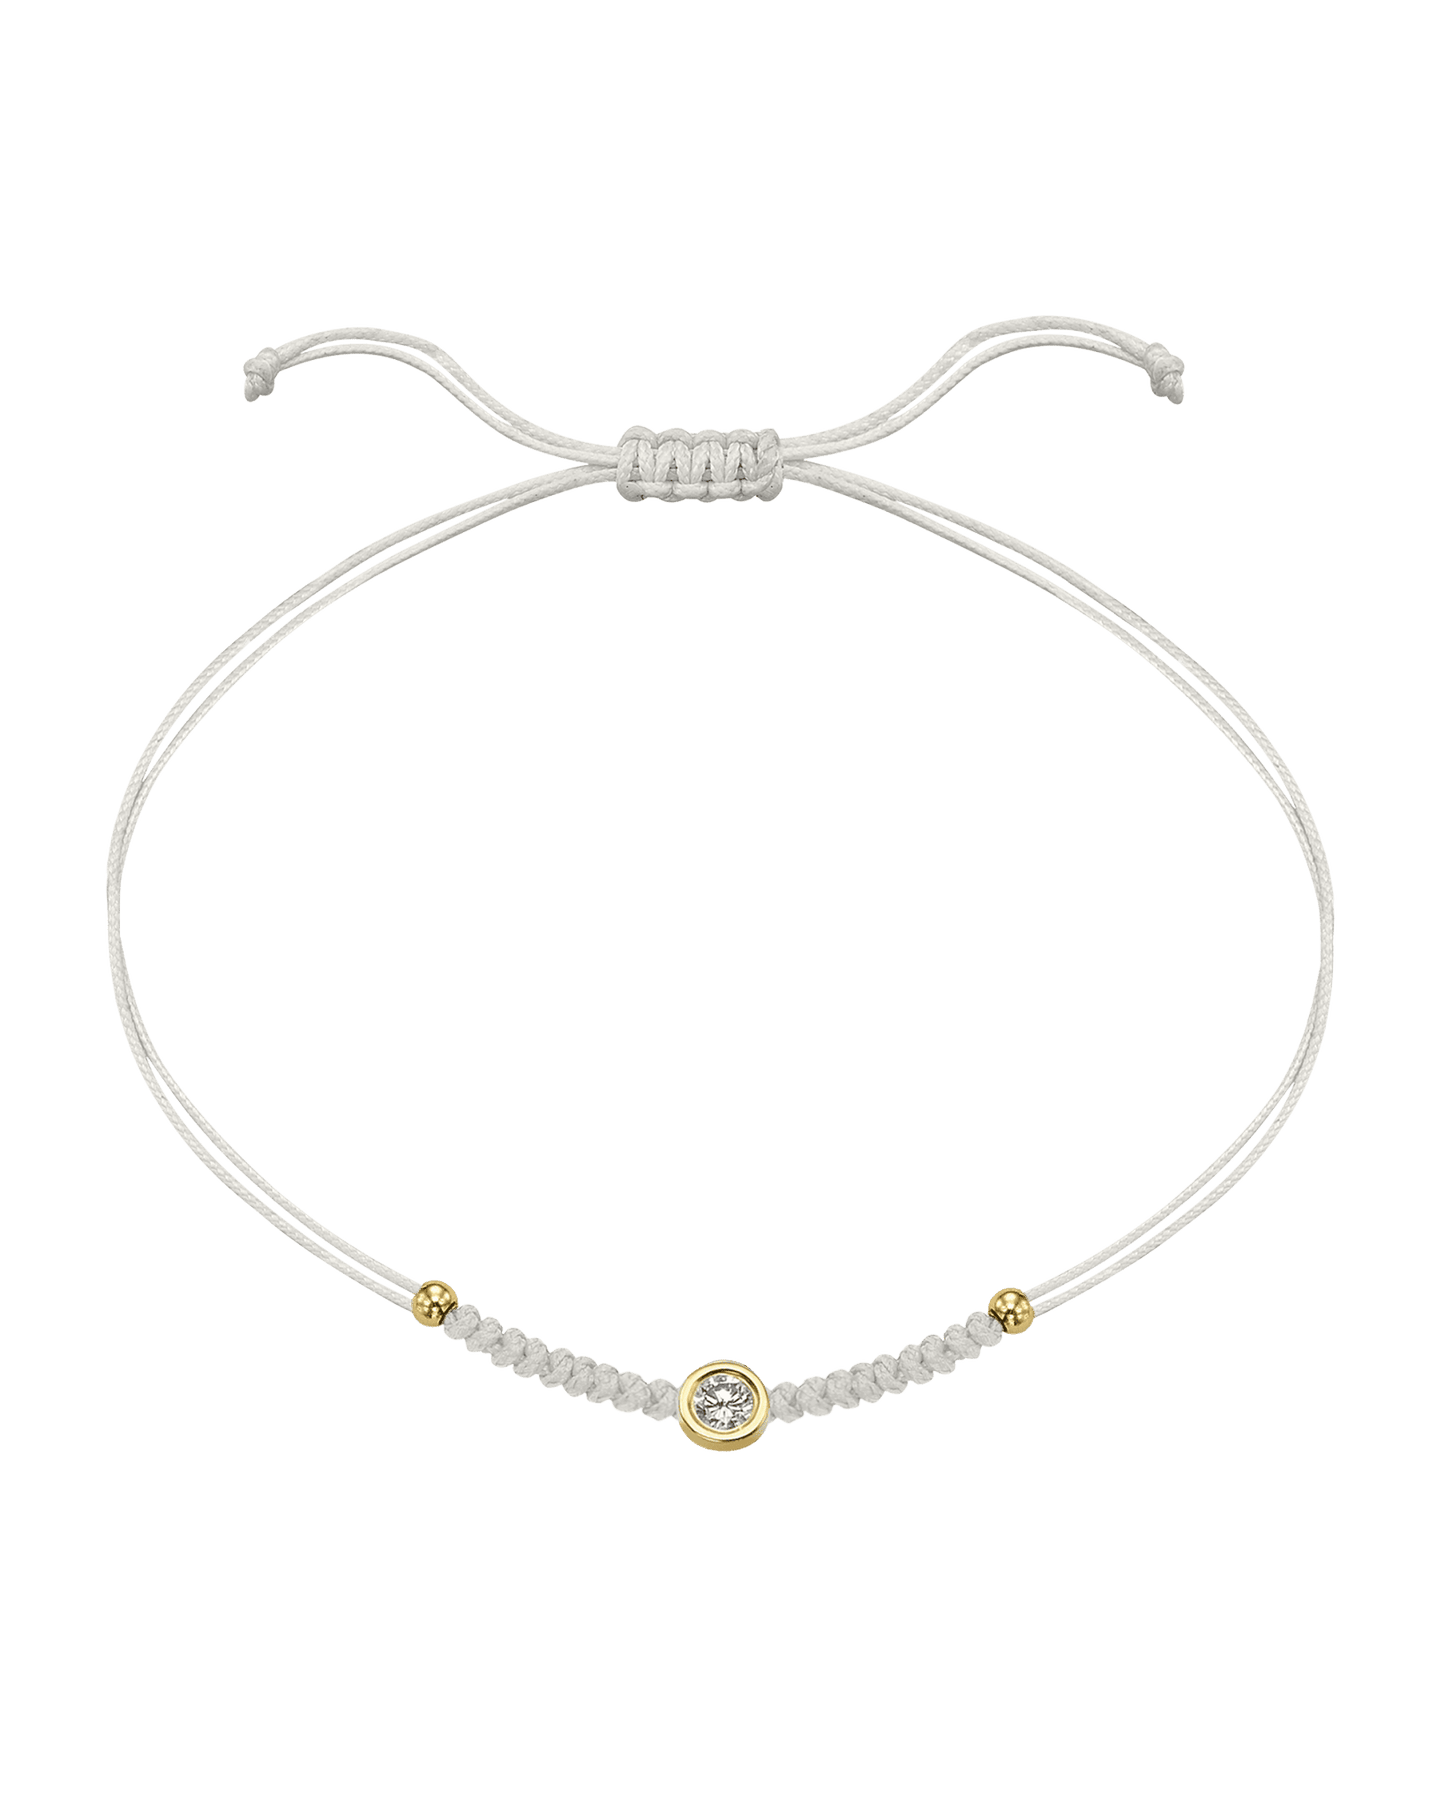 Solid Gold Sphere String of Love - 14K Yellow Gold Bracelet 14K Solid Gold Pearl Large: 0.1ct 